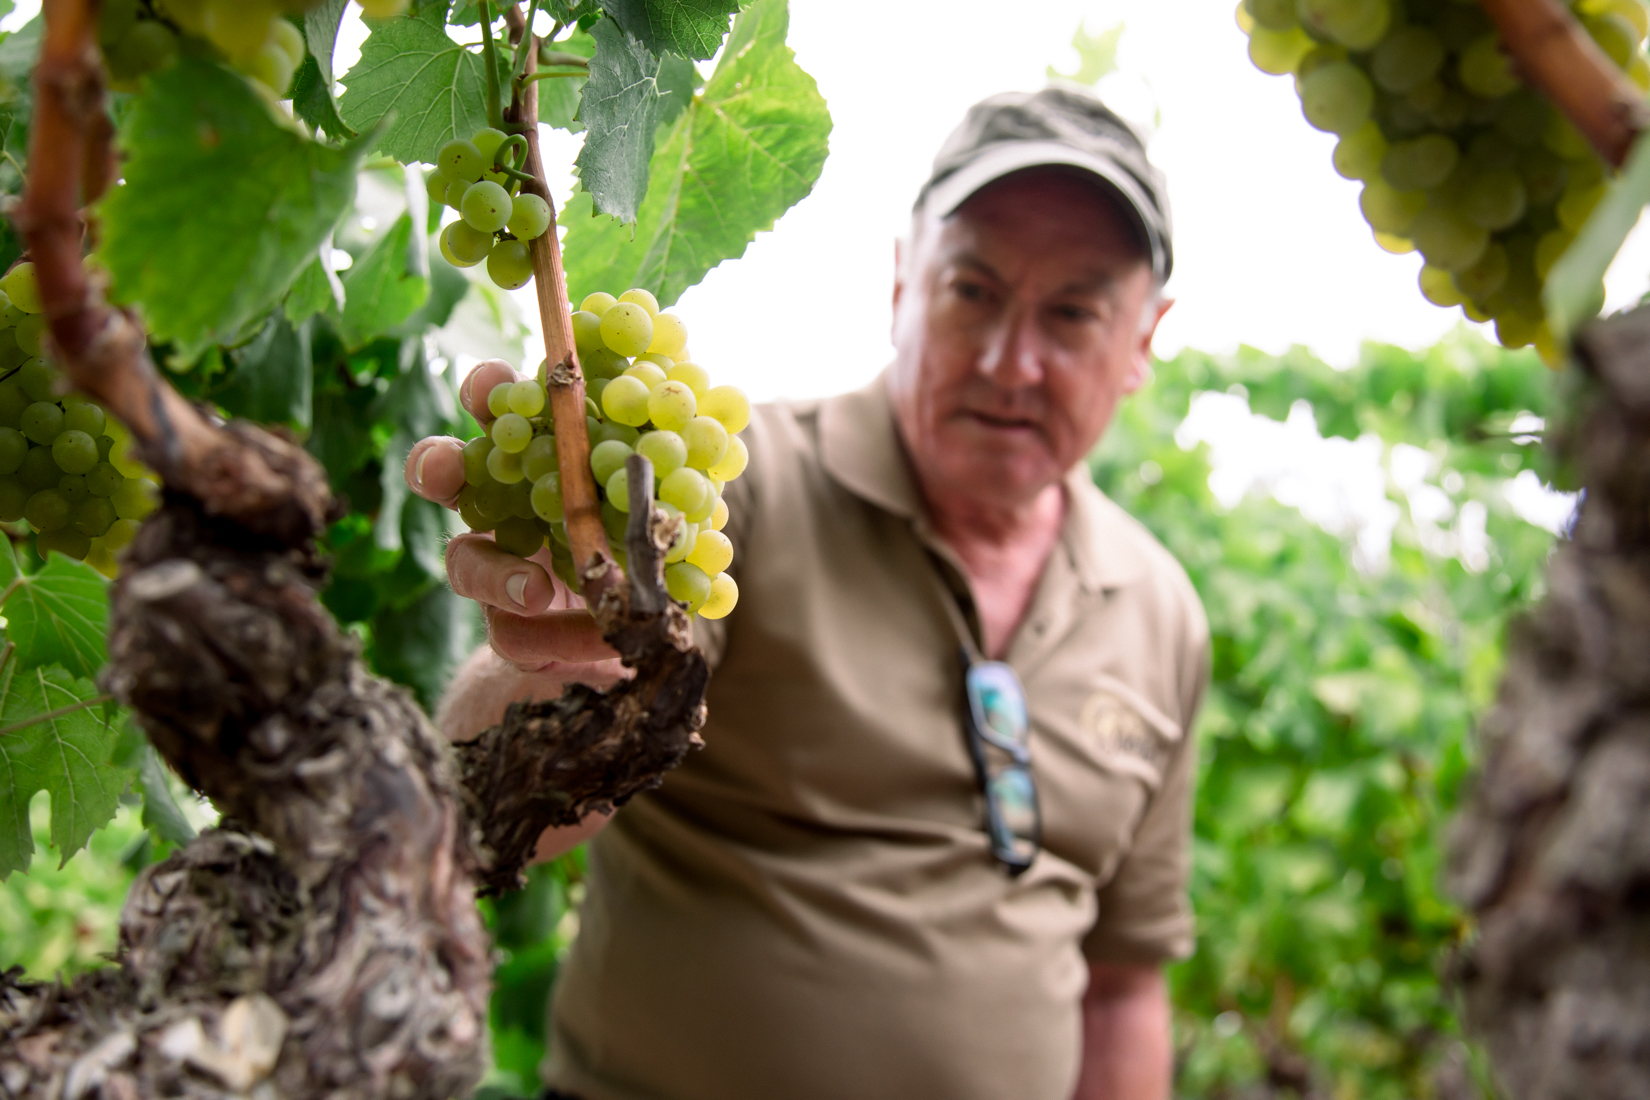 Man in a brown shirt and baseball cap reaches for a green bundle of grapes on the vine.